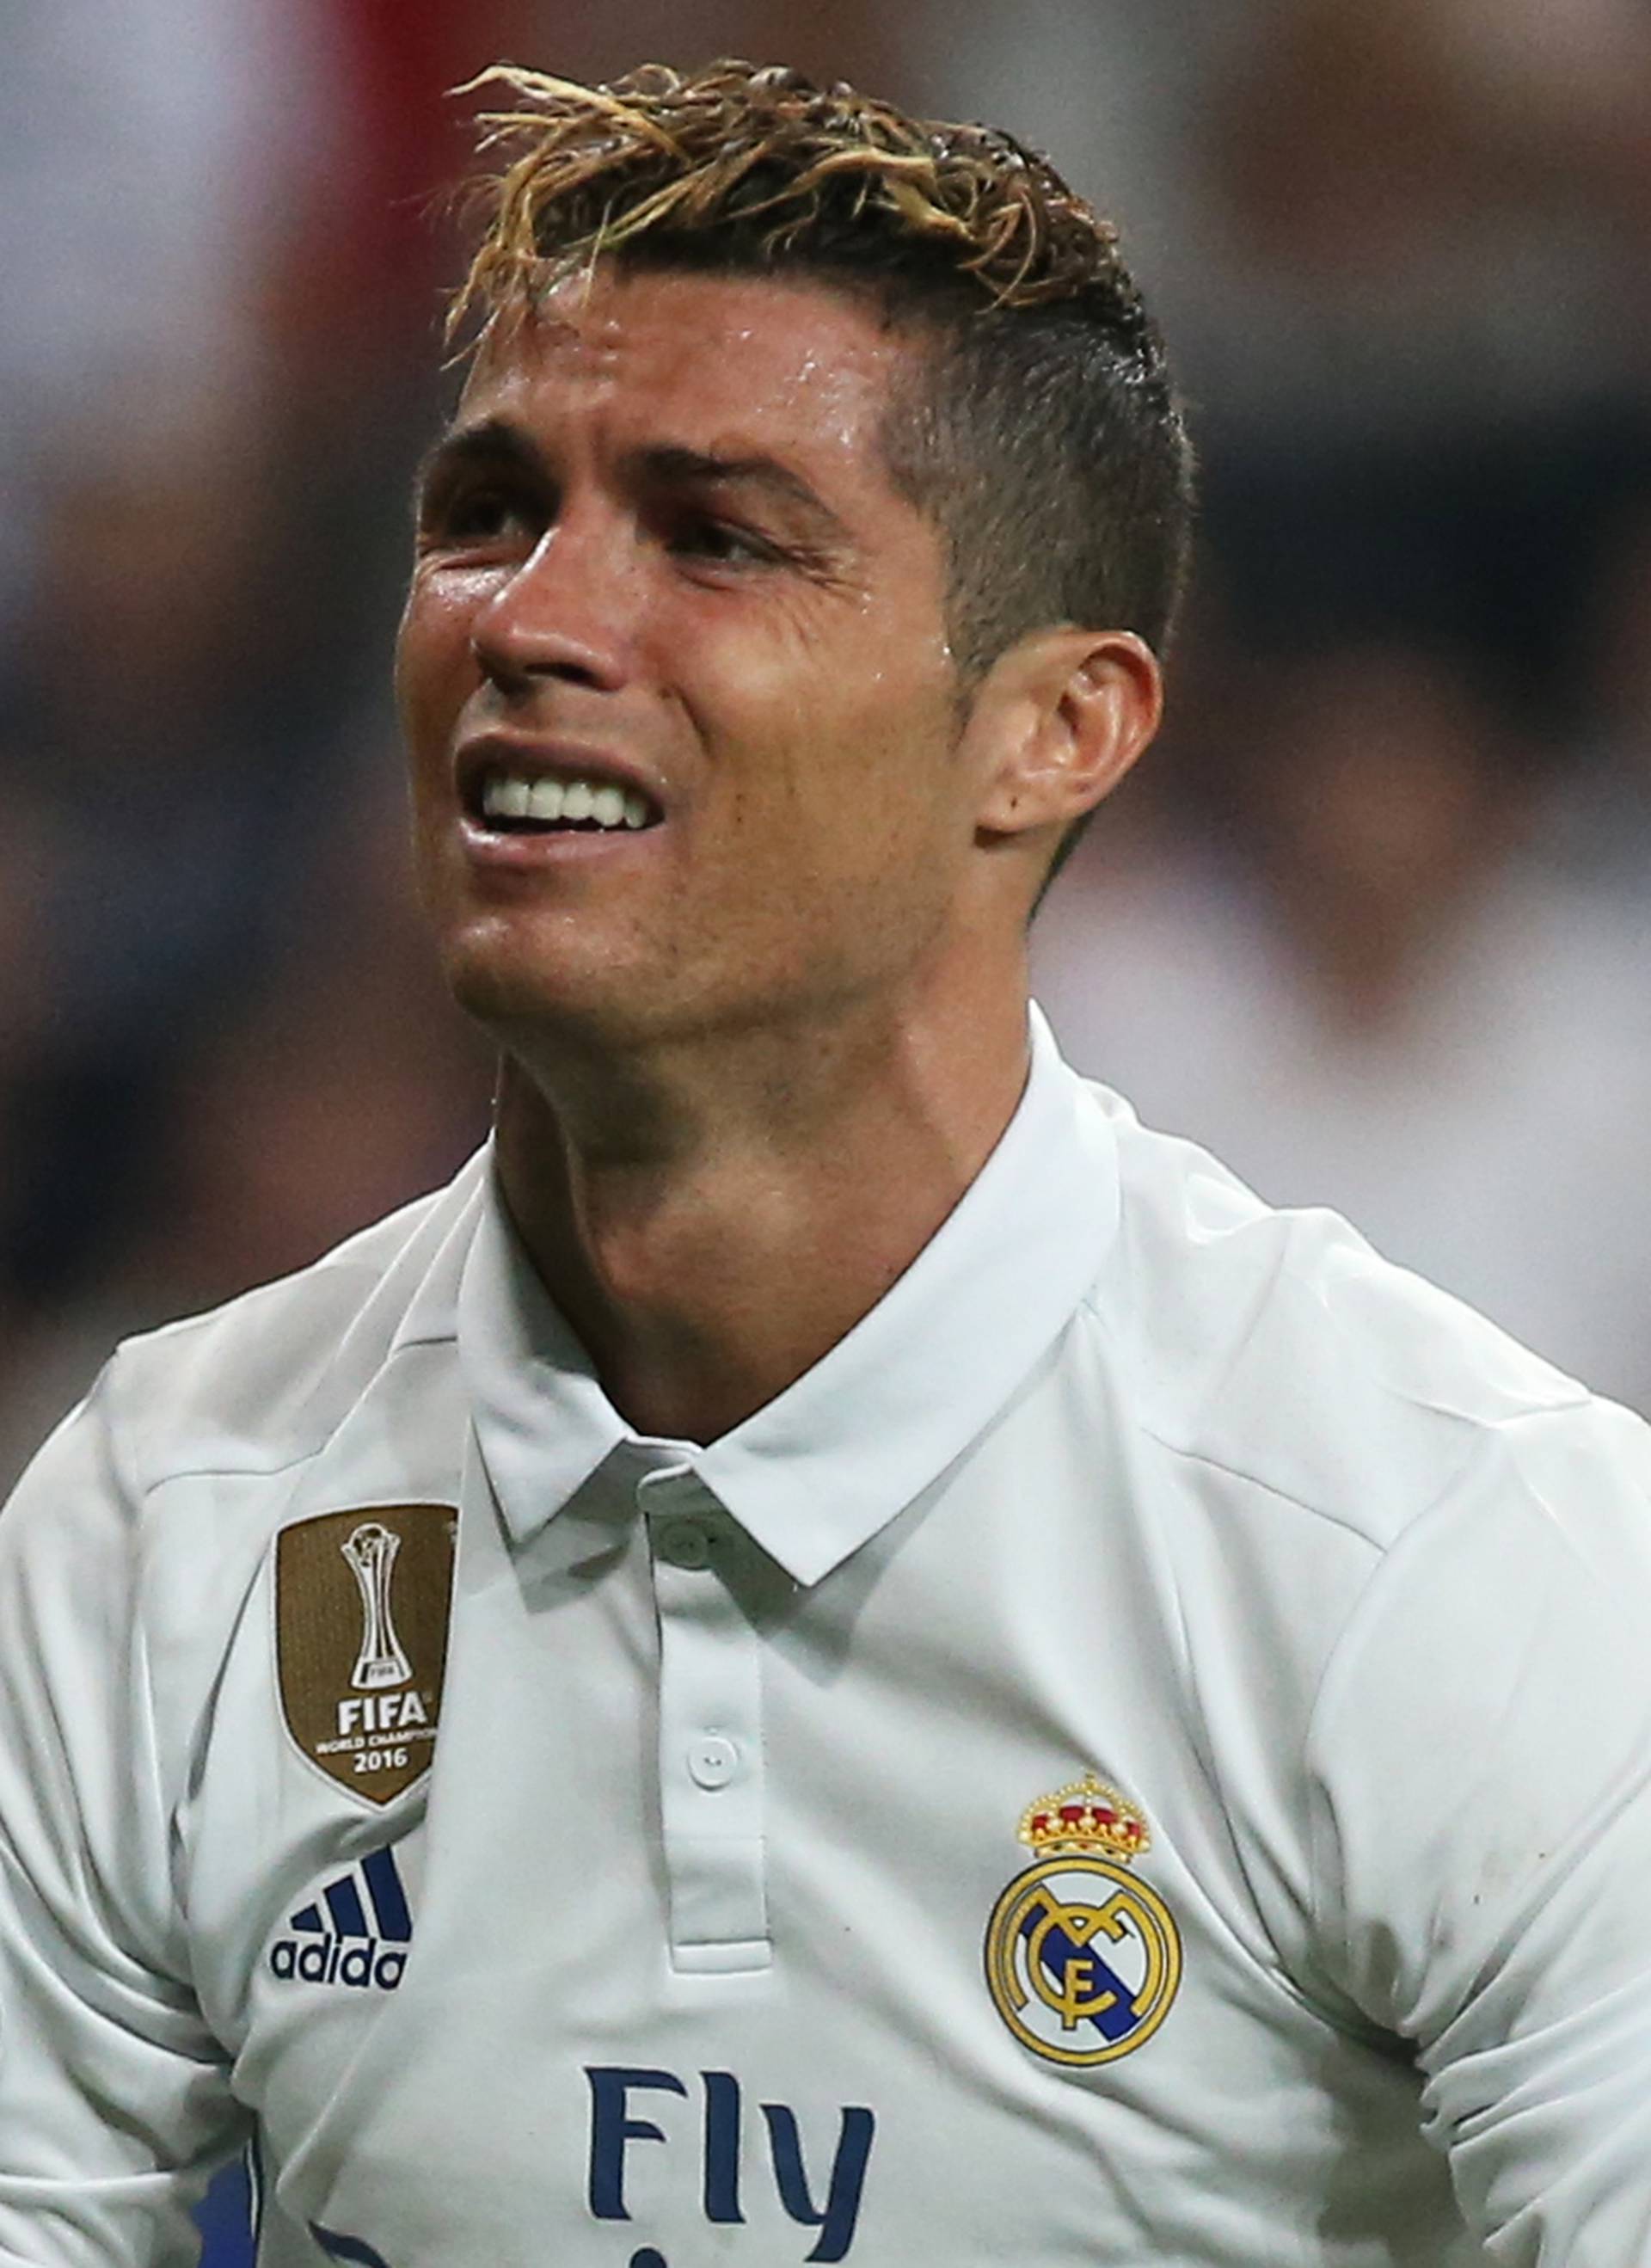 Real Madrid's Cristiano Ronaldo looks dejected after missing a chance to score